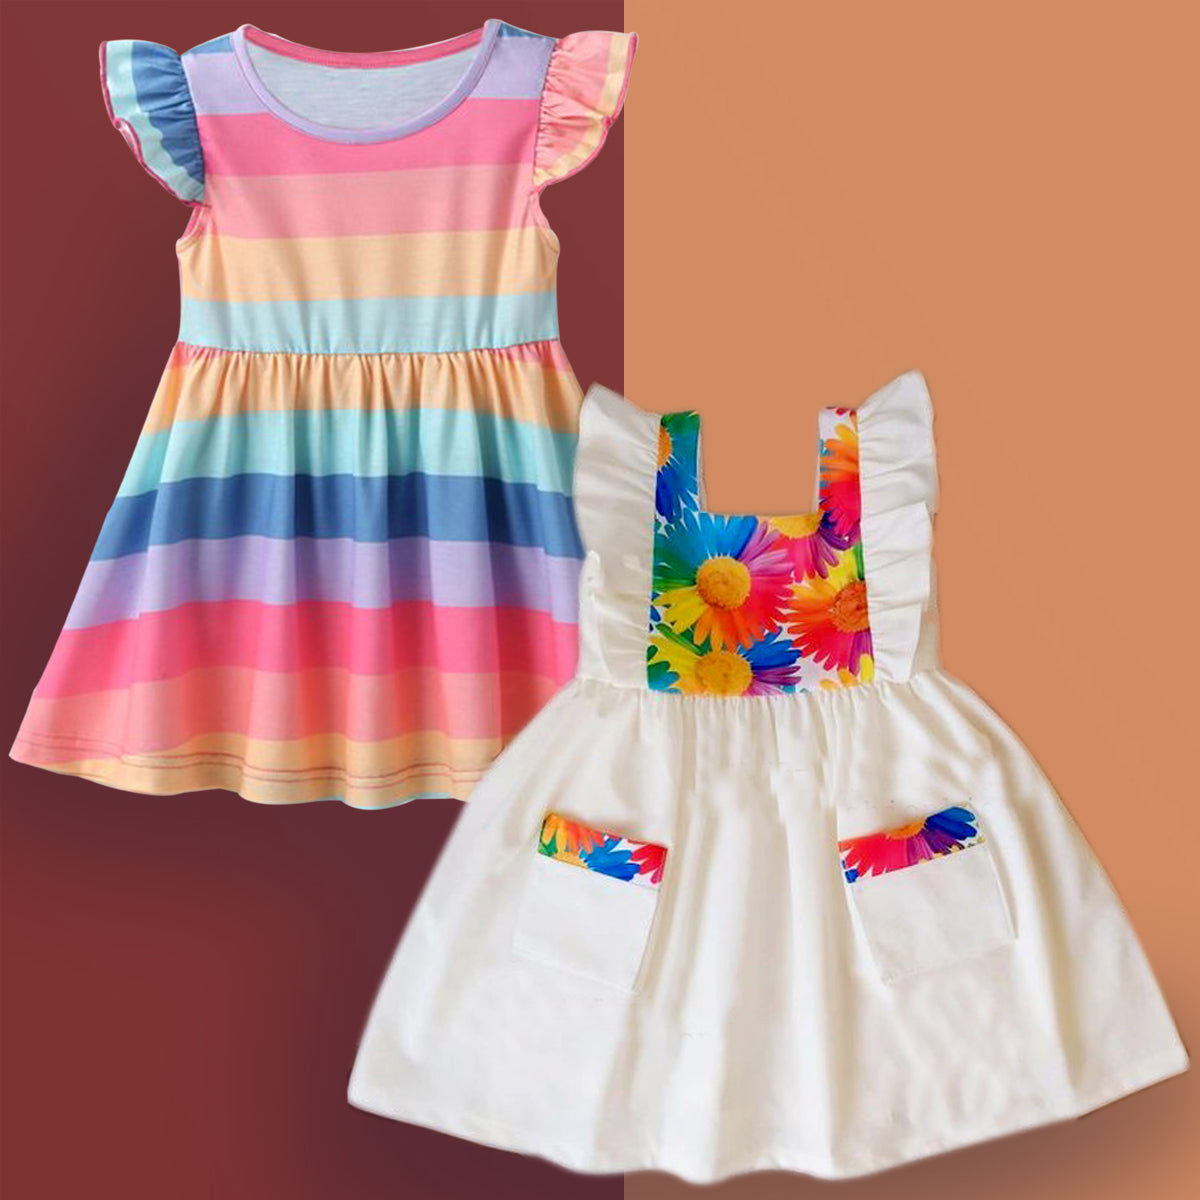 Princess BabyGirl's Stylish Multicolor & White Tunic Dresses_Frocks Combo for Kids.